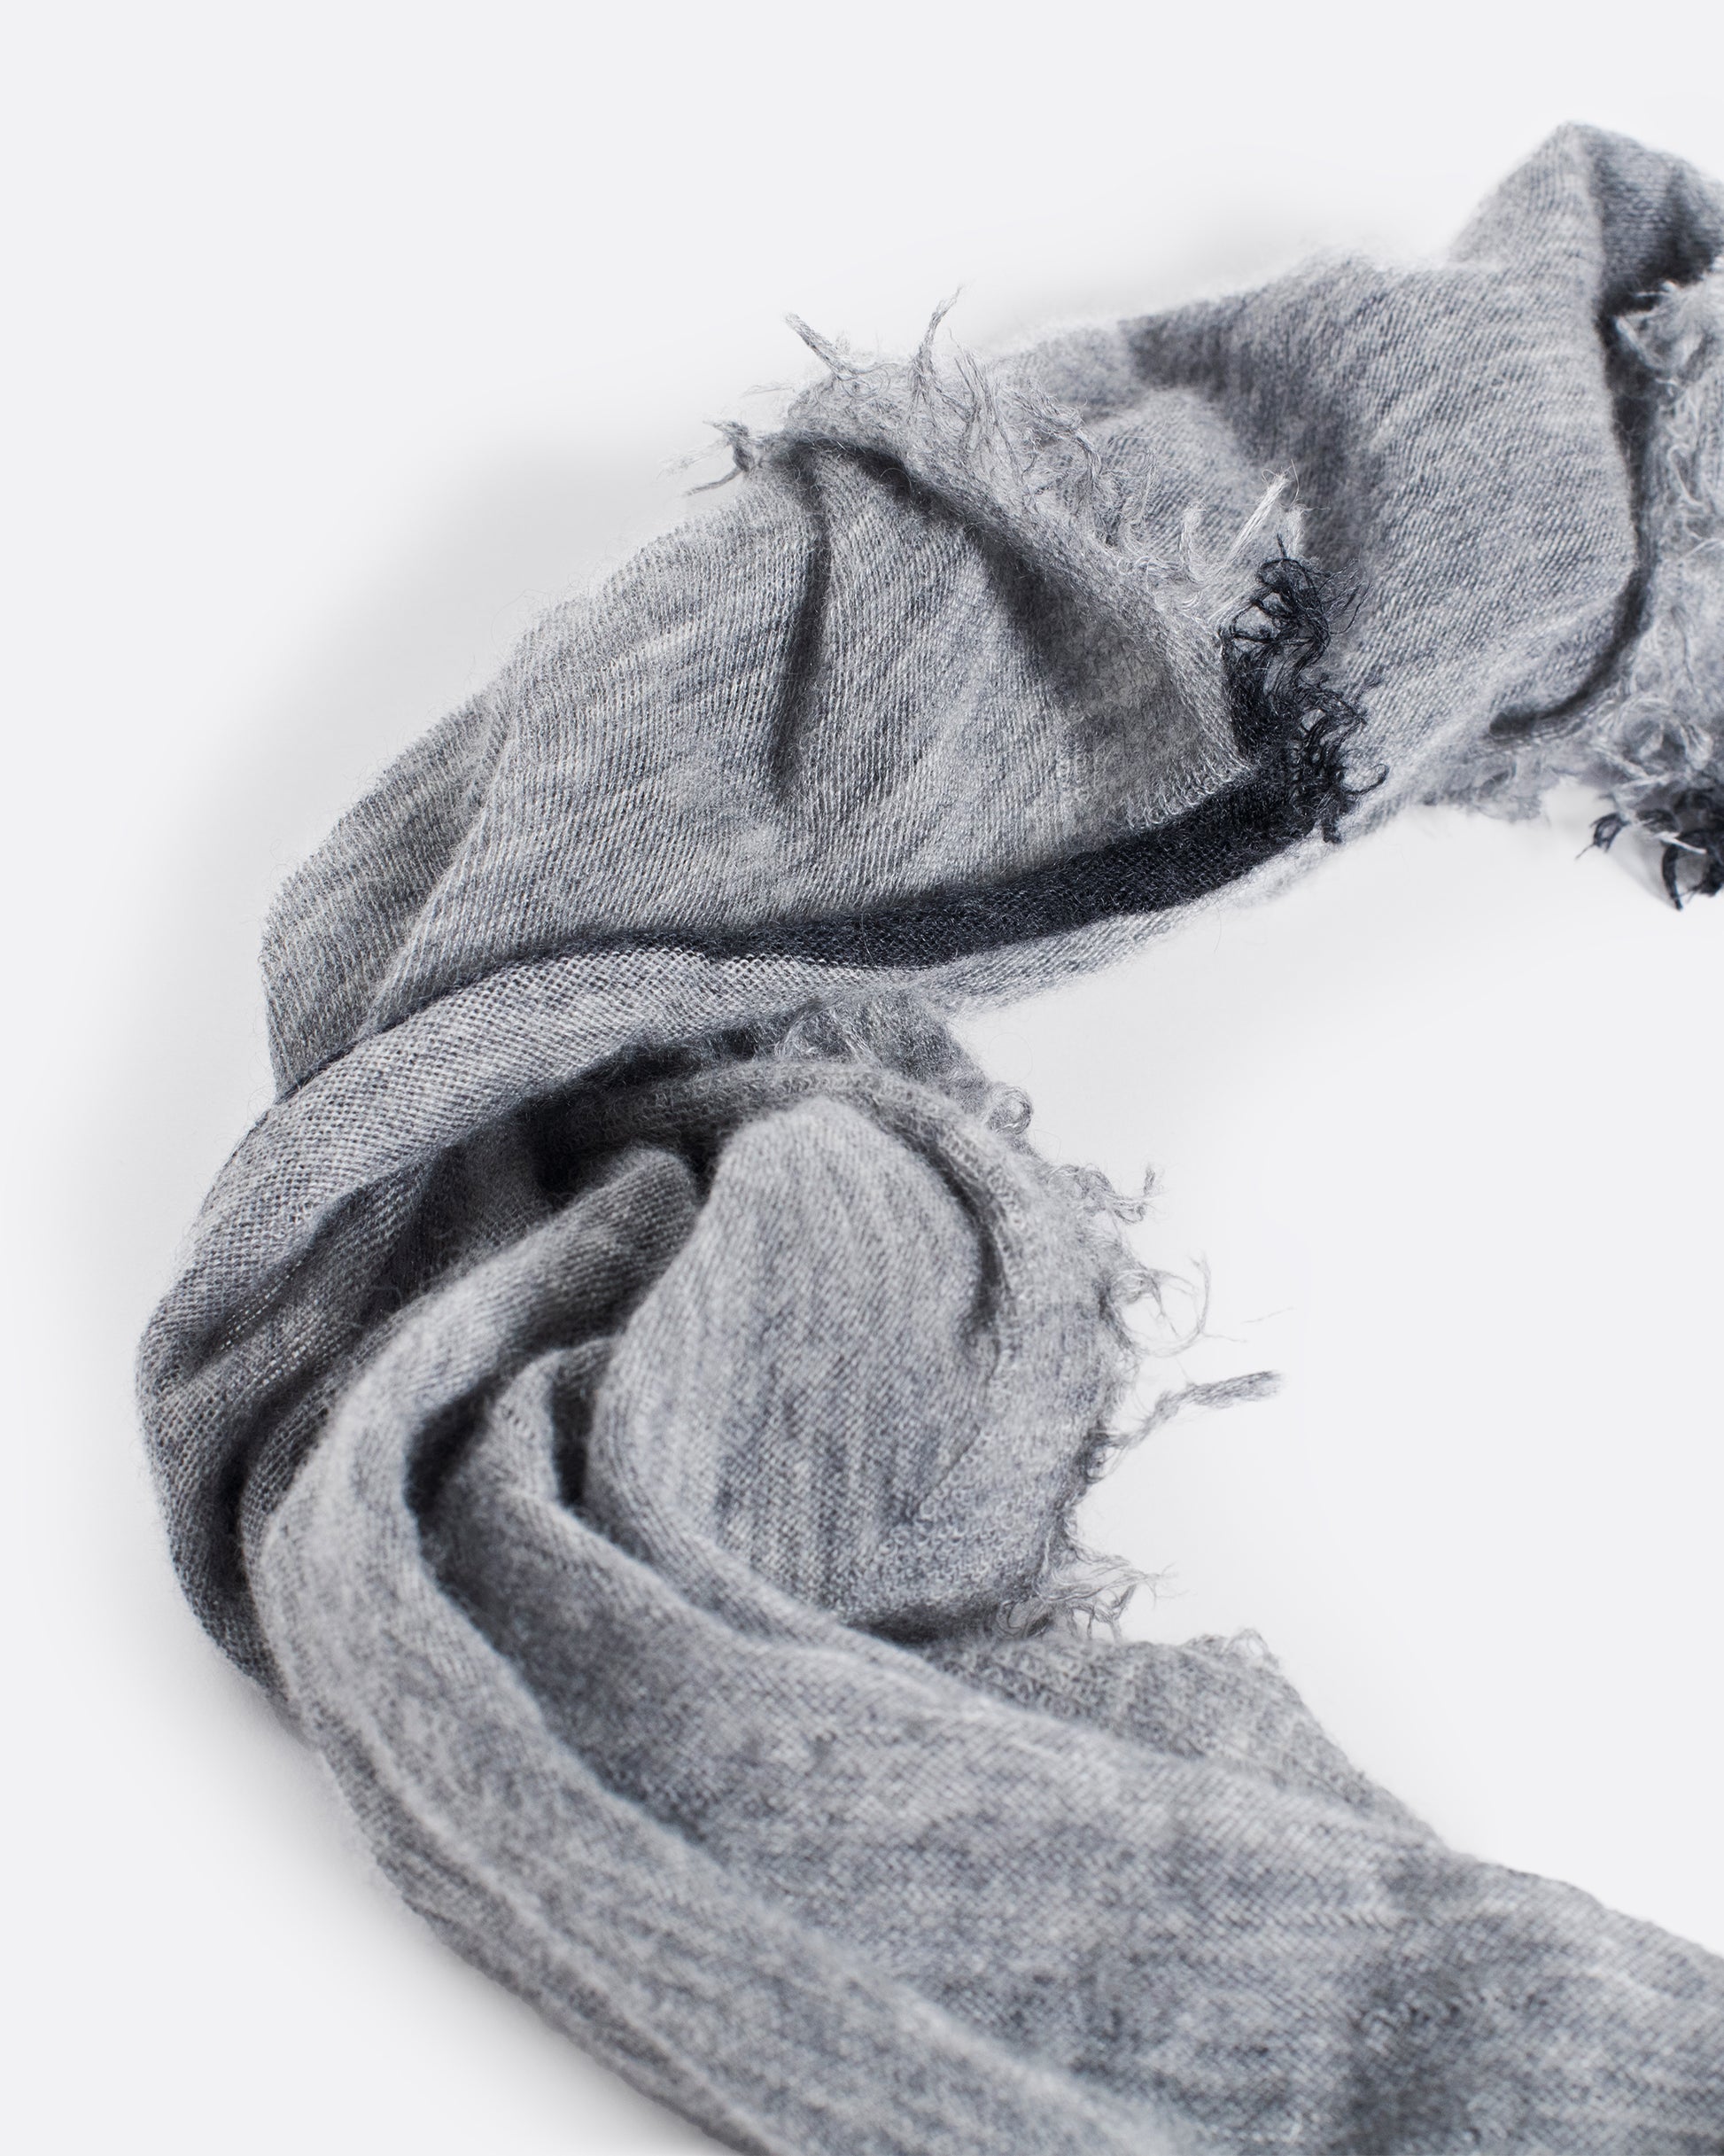 this is a rare cashmere piece you'll never take off. Style as a scarf, babushka, shawl, layer under chunky necklaces, or tie it on your bag. Available in warm beige, navy, black, and charcoal milk